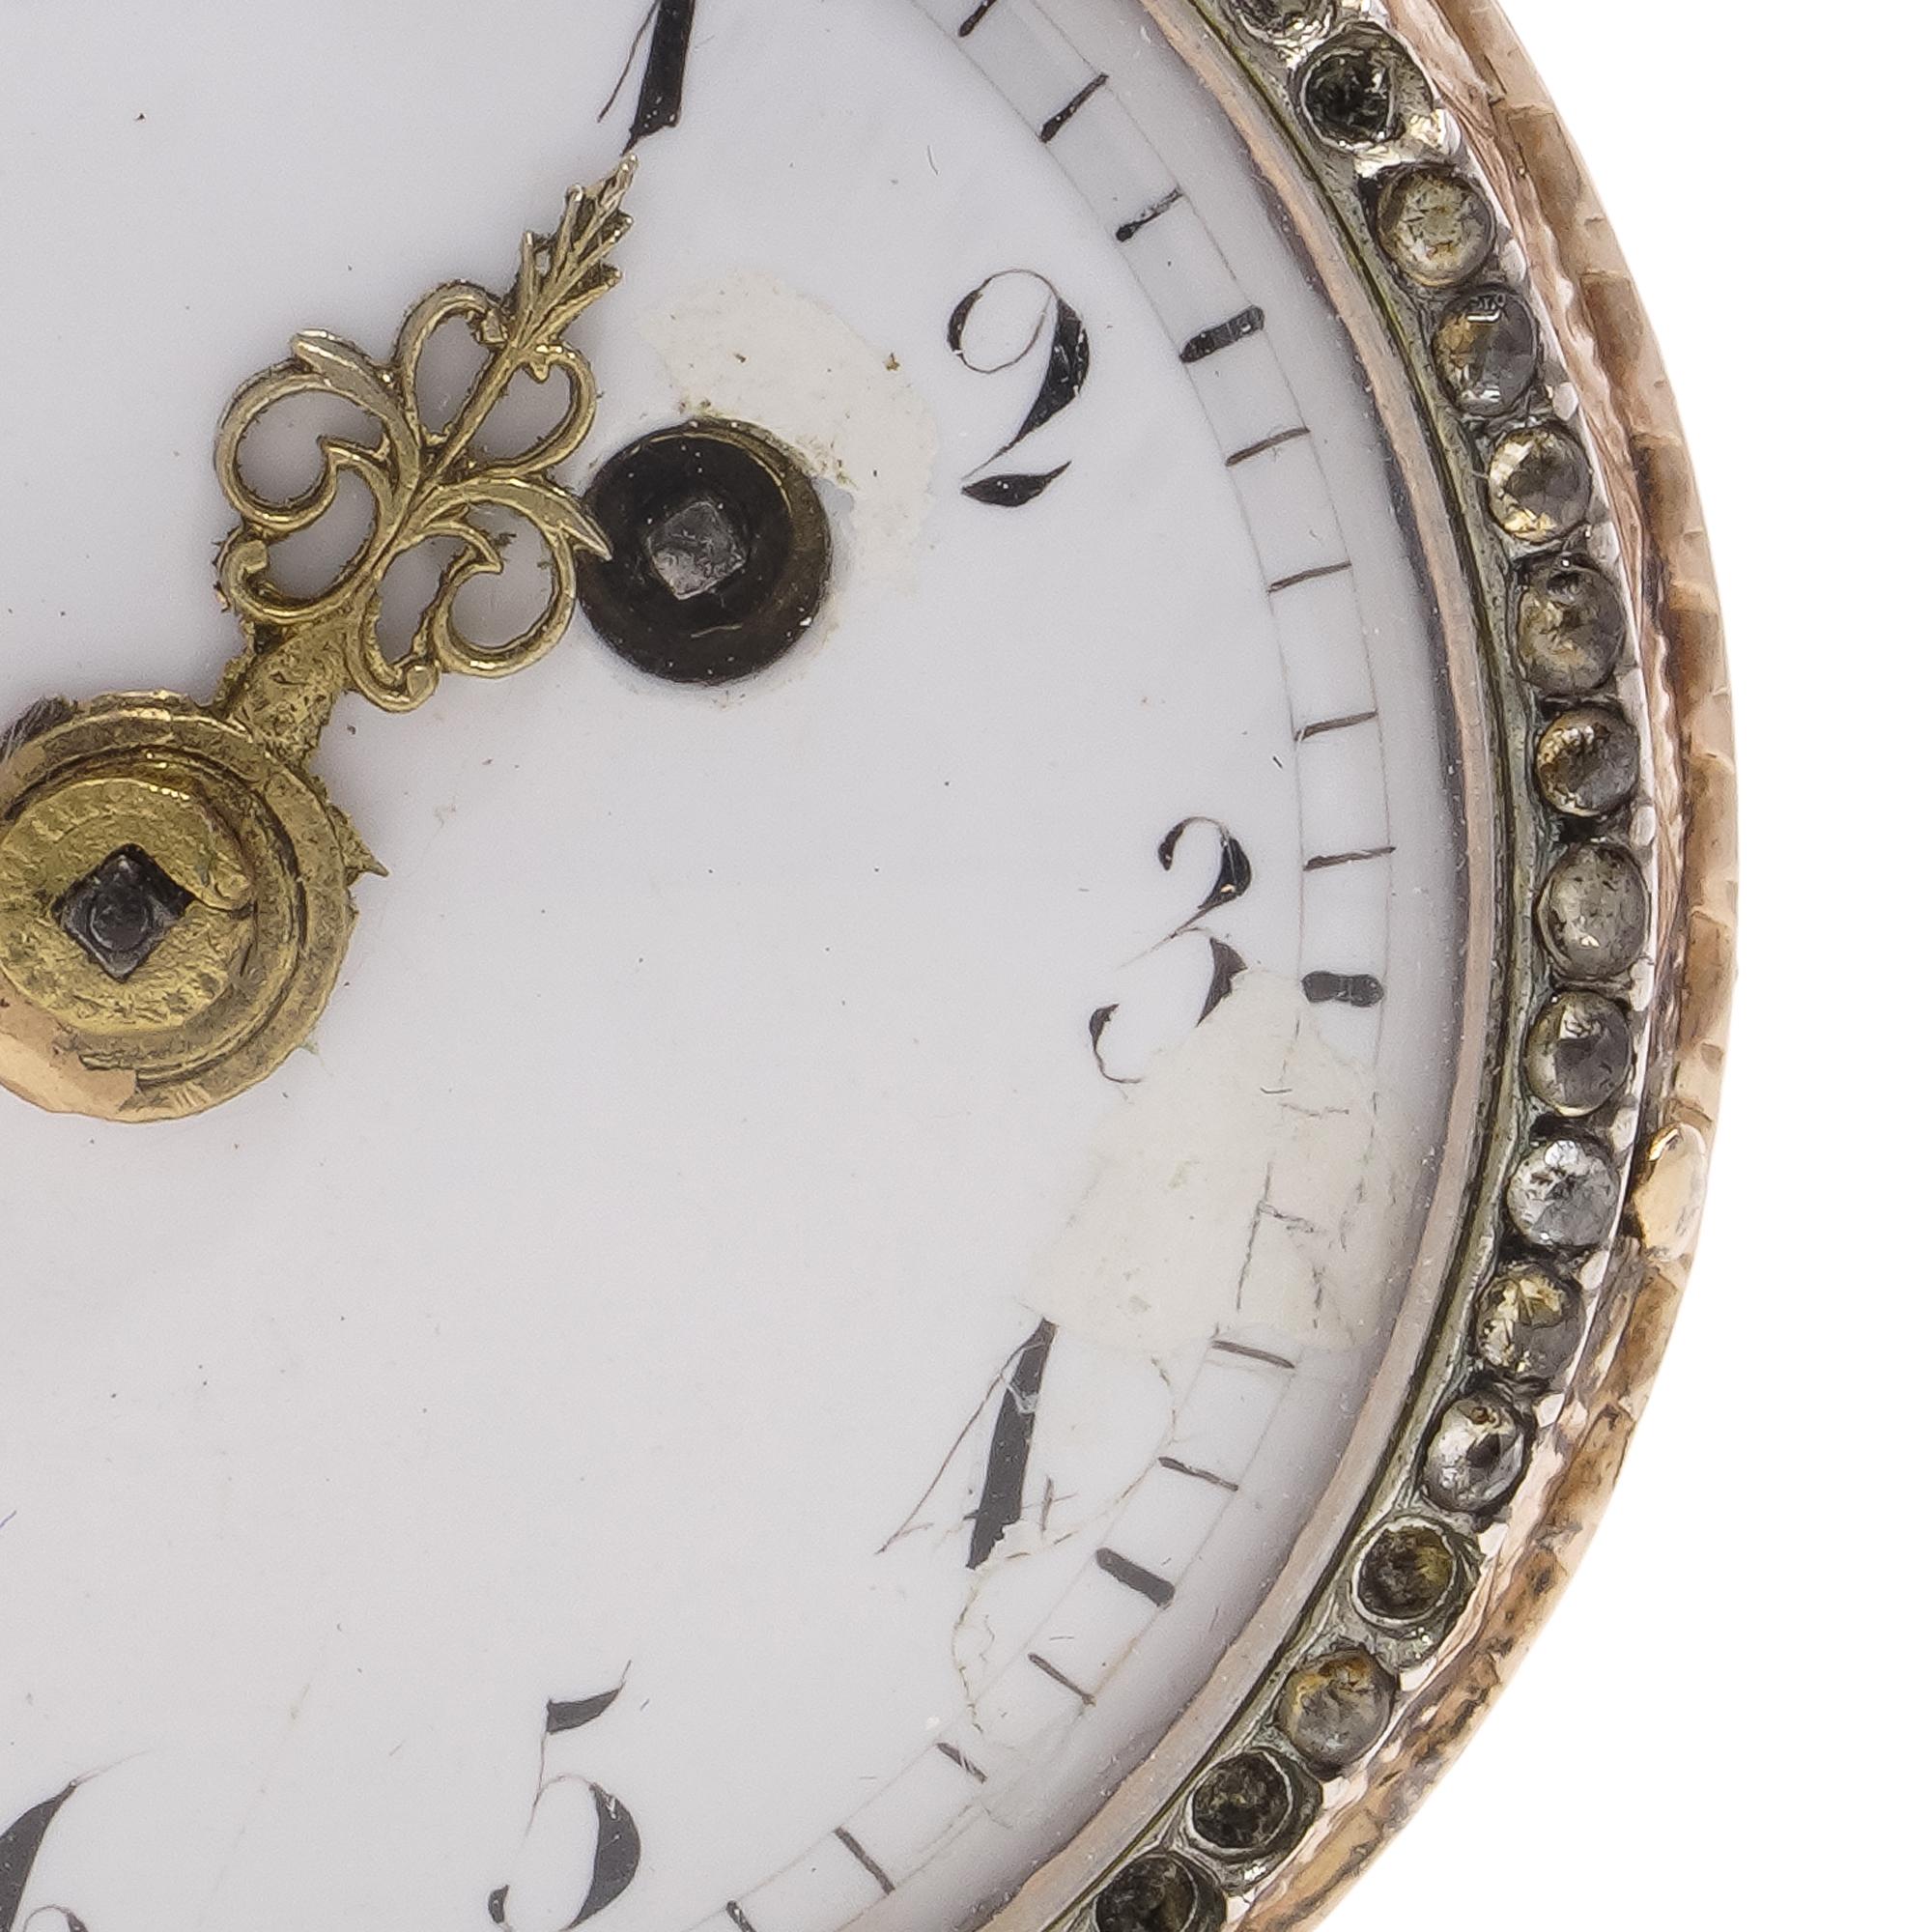 18th-century Lépine Verge movement key wind 18kt gold, a silver pocket watch For Sale 6